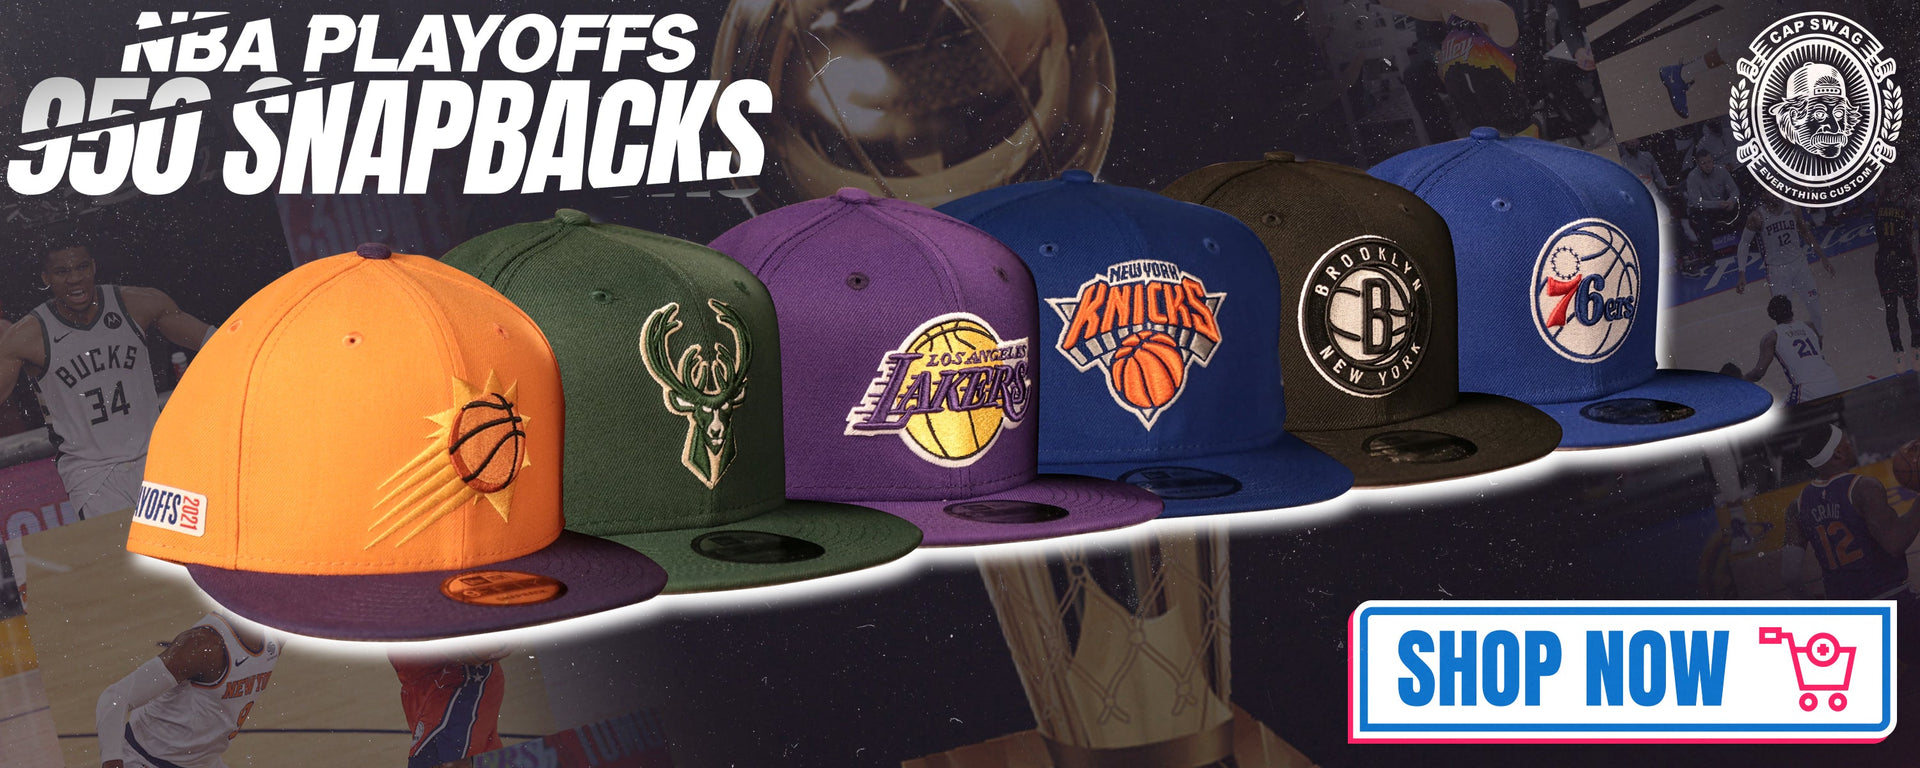 Shop hats to show love for your favorite NBA team with this collection of NBA 2021 Playoffs 950 Snapback Hats